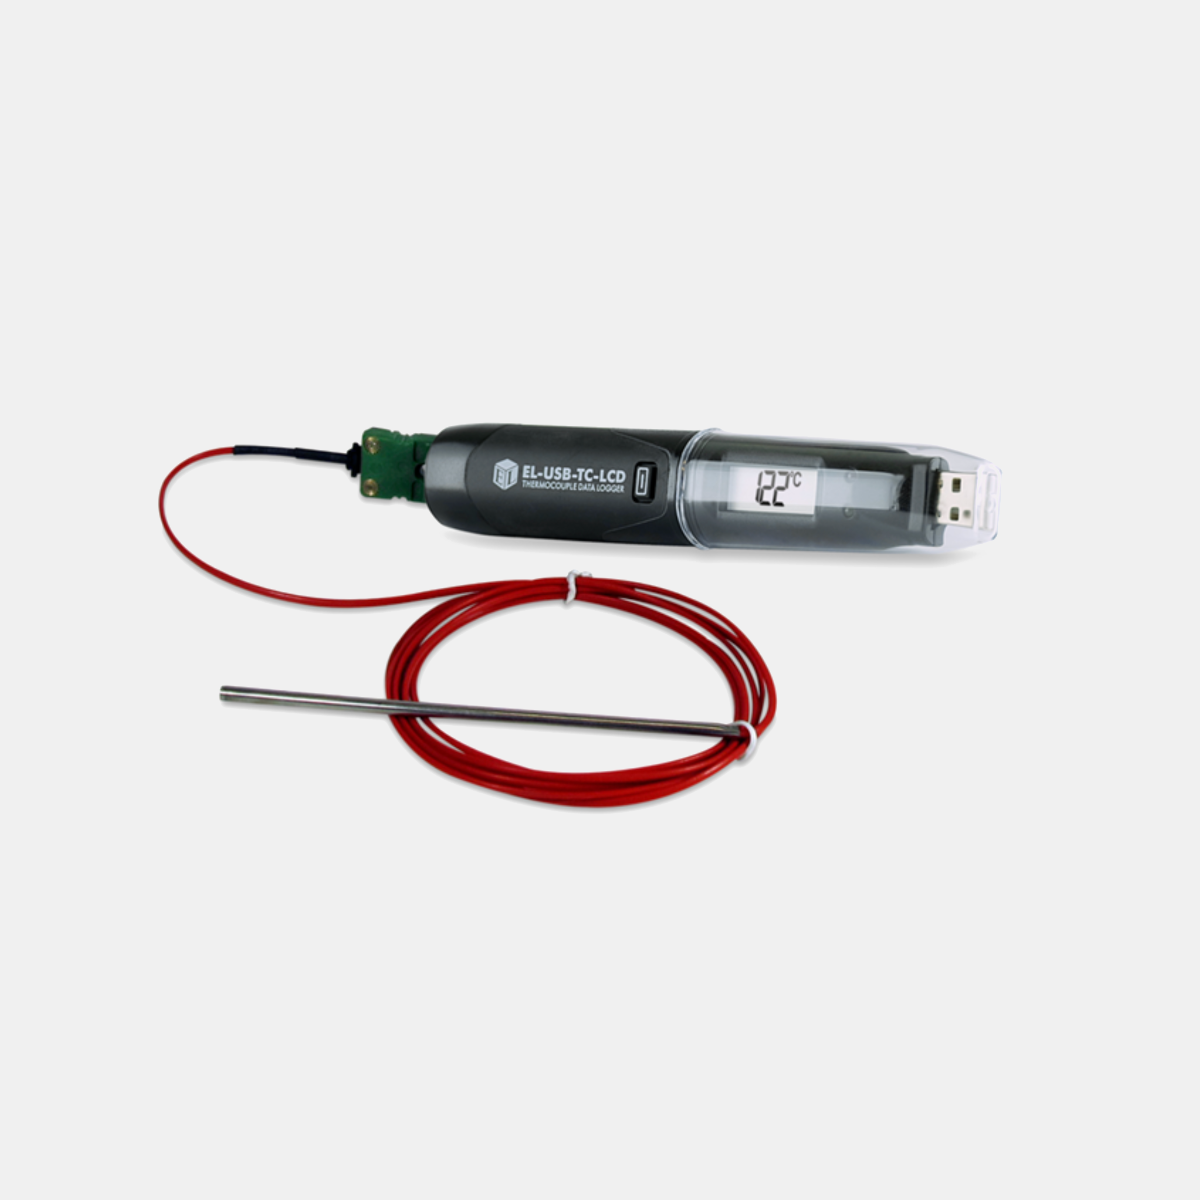 Thermocouple Temperature Data Logger with USB and Display